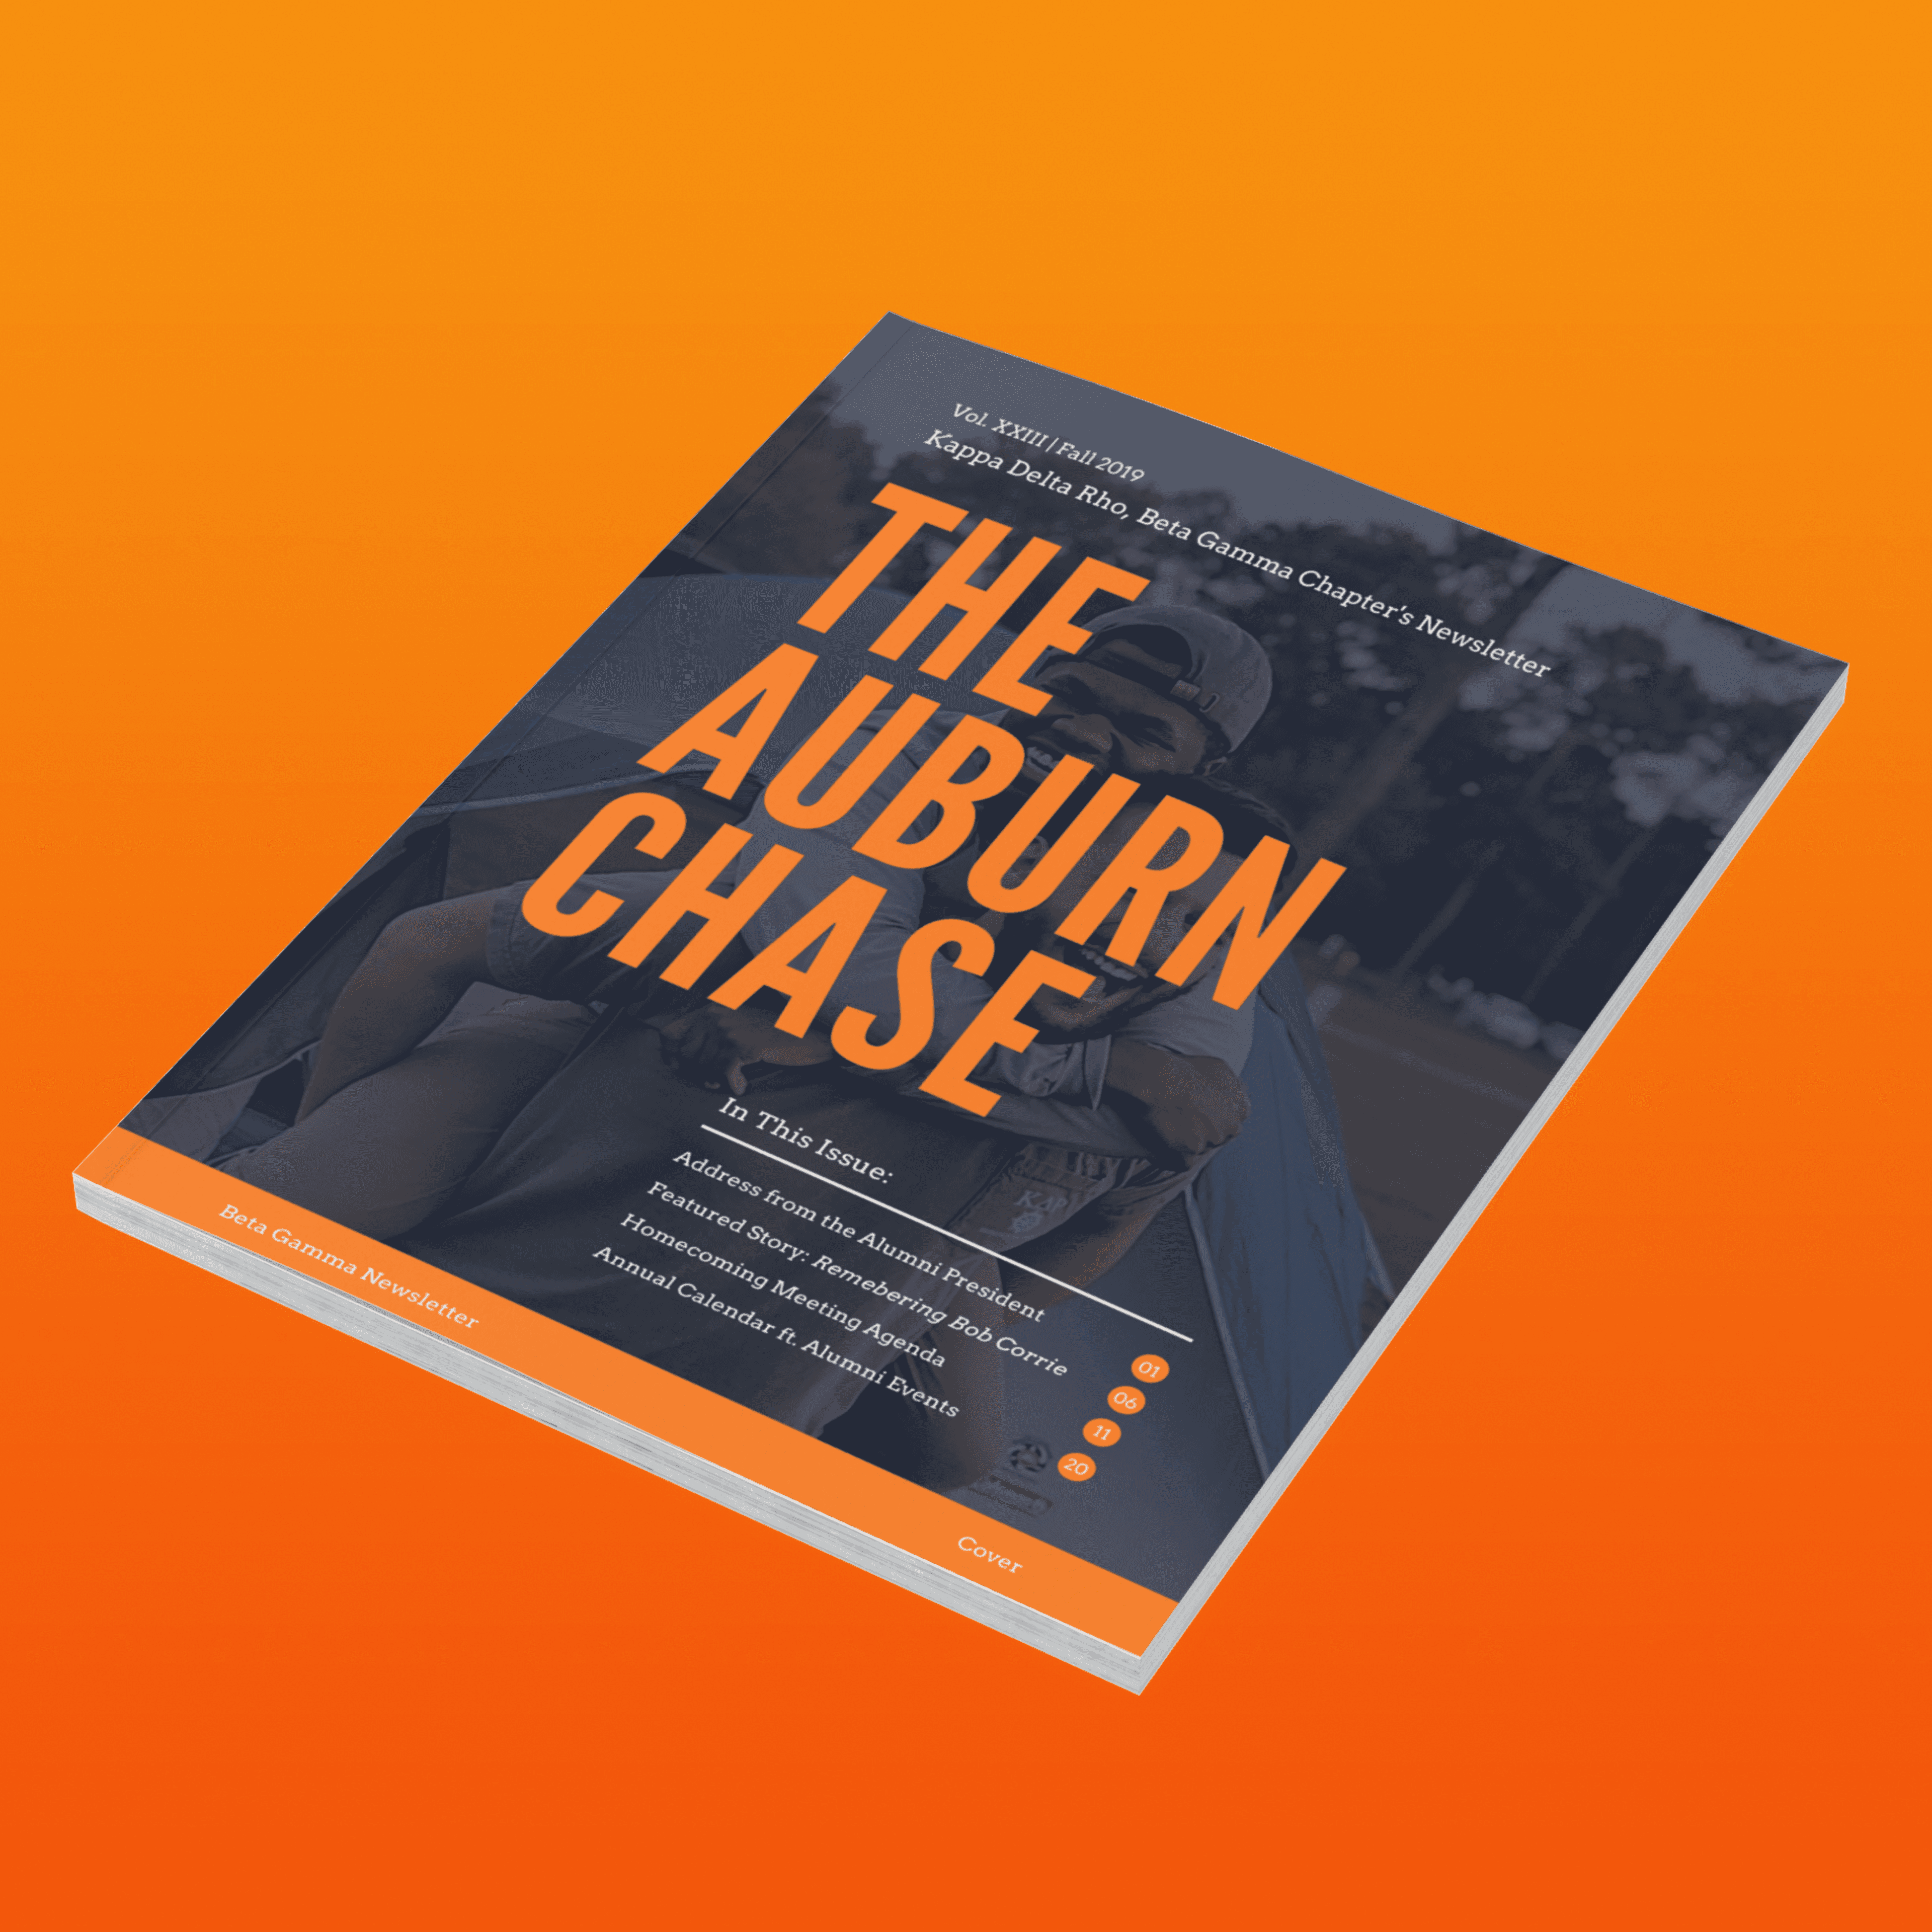 A magazine mockup with a large title reading "The Auburn Chase". The cover features two young men smiling at a campsite while on piggy back.